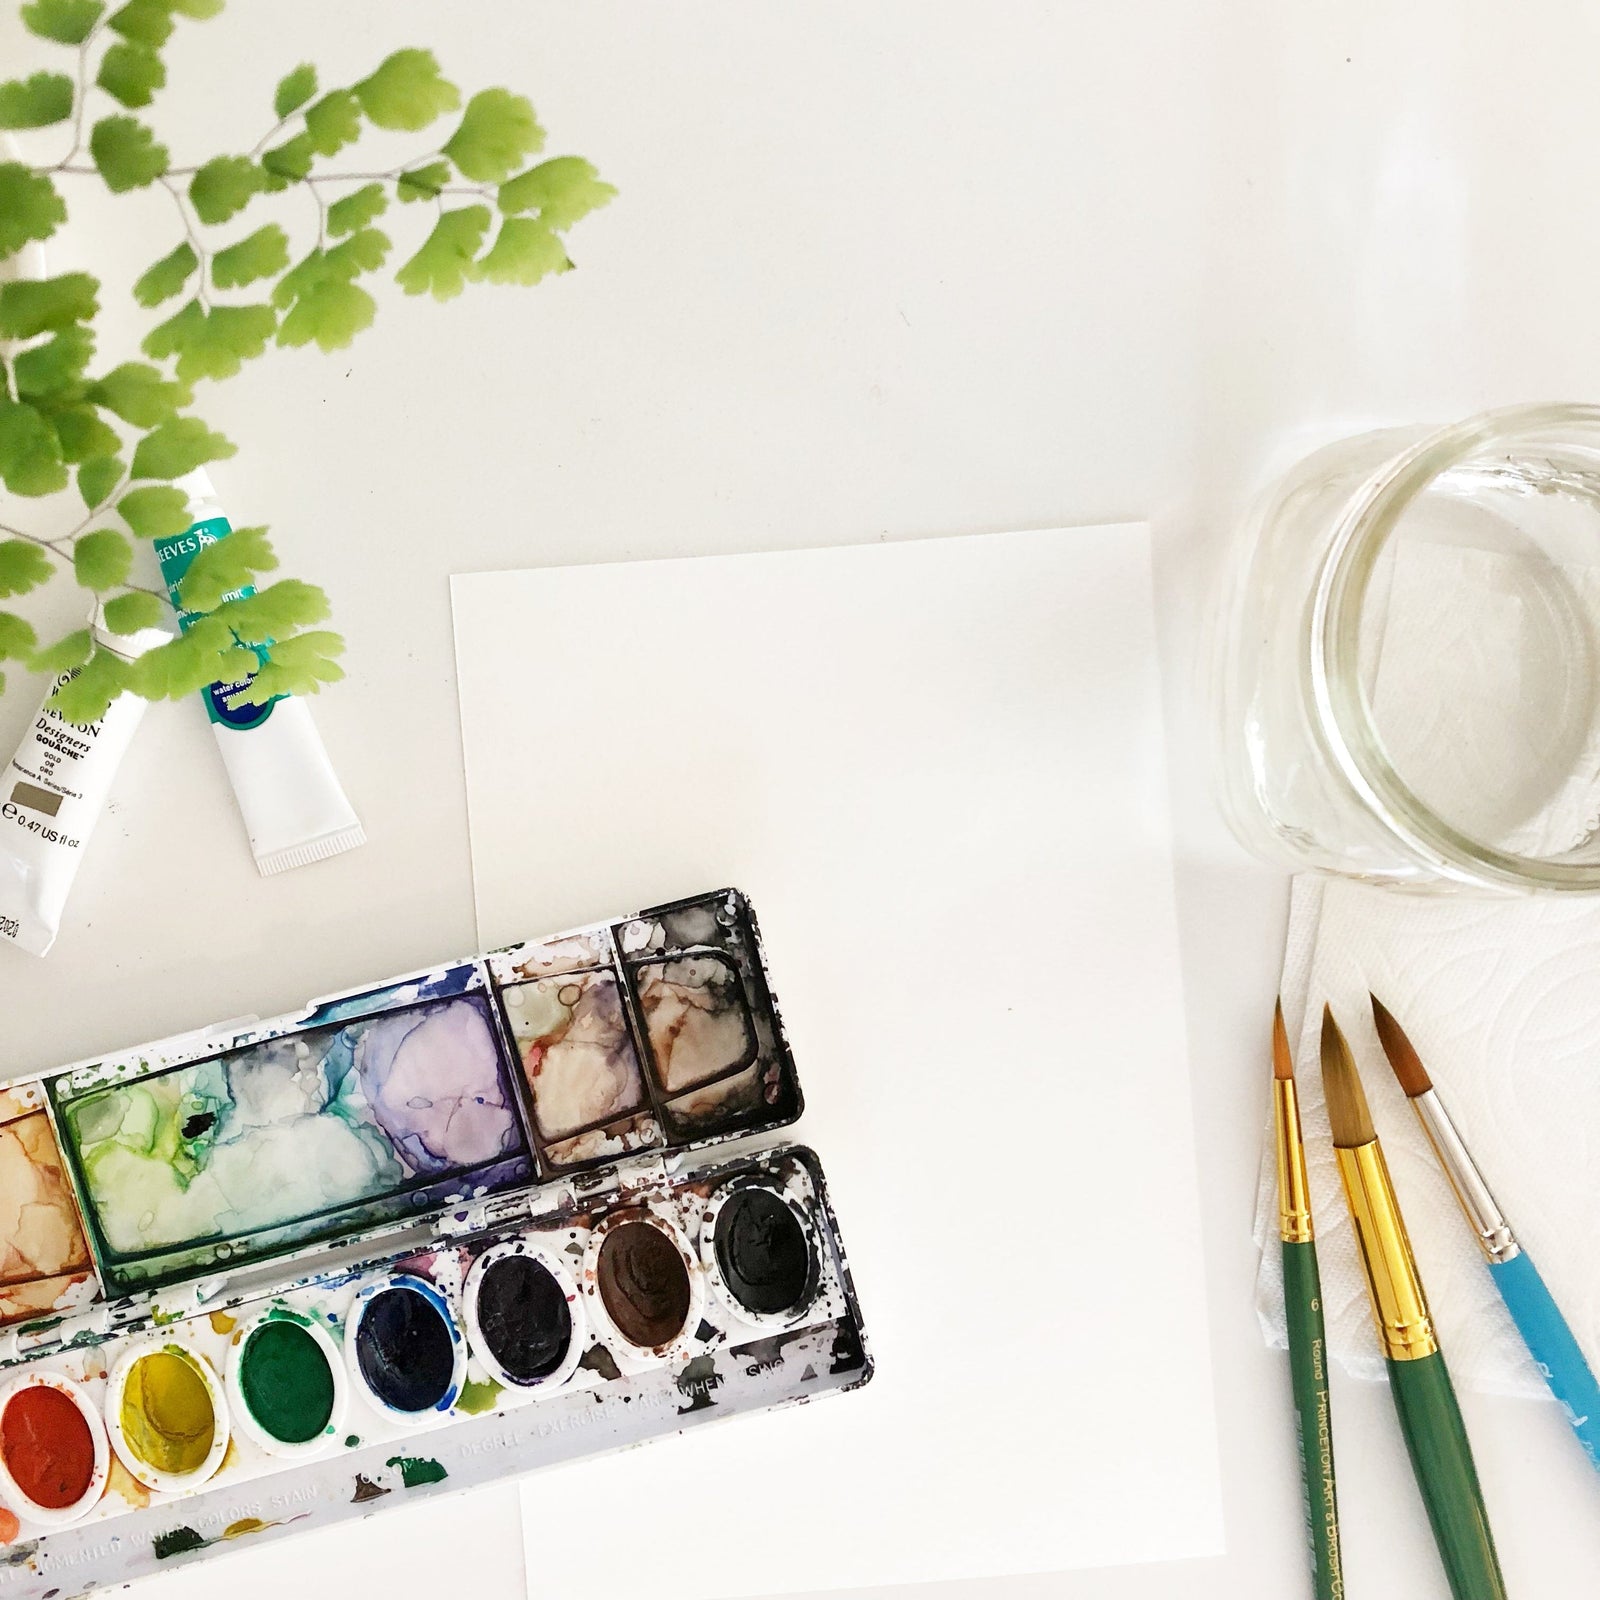 FREE ebooks, classes, and open source photos - Watercolor